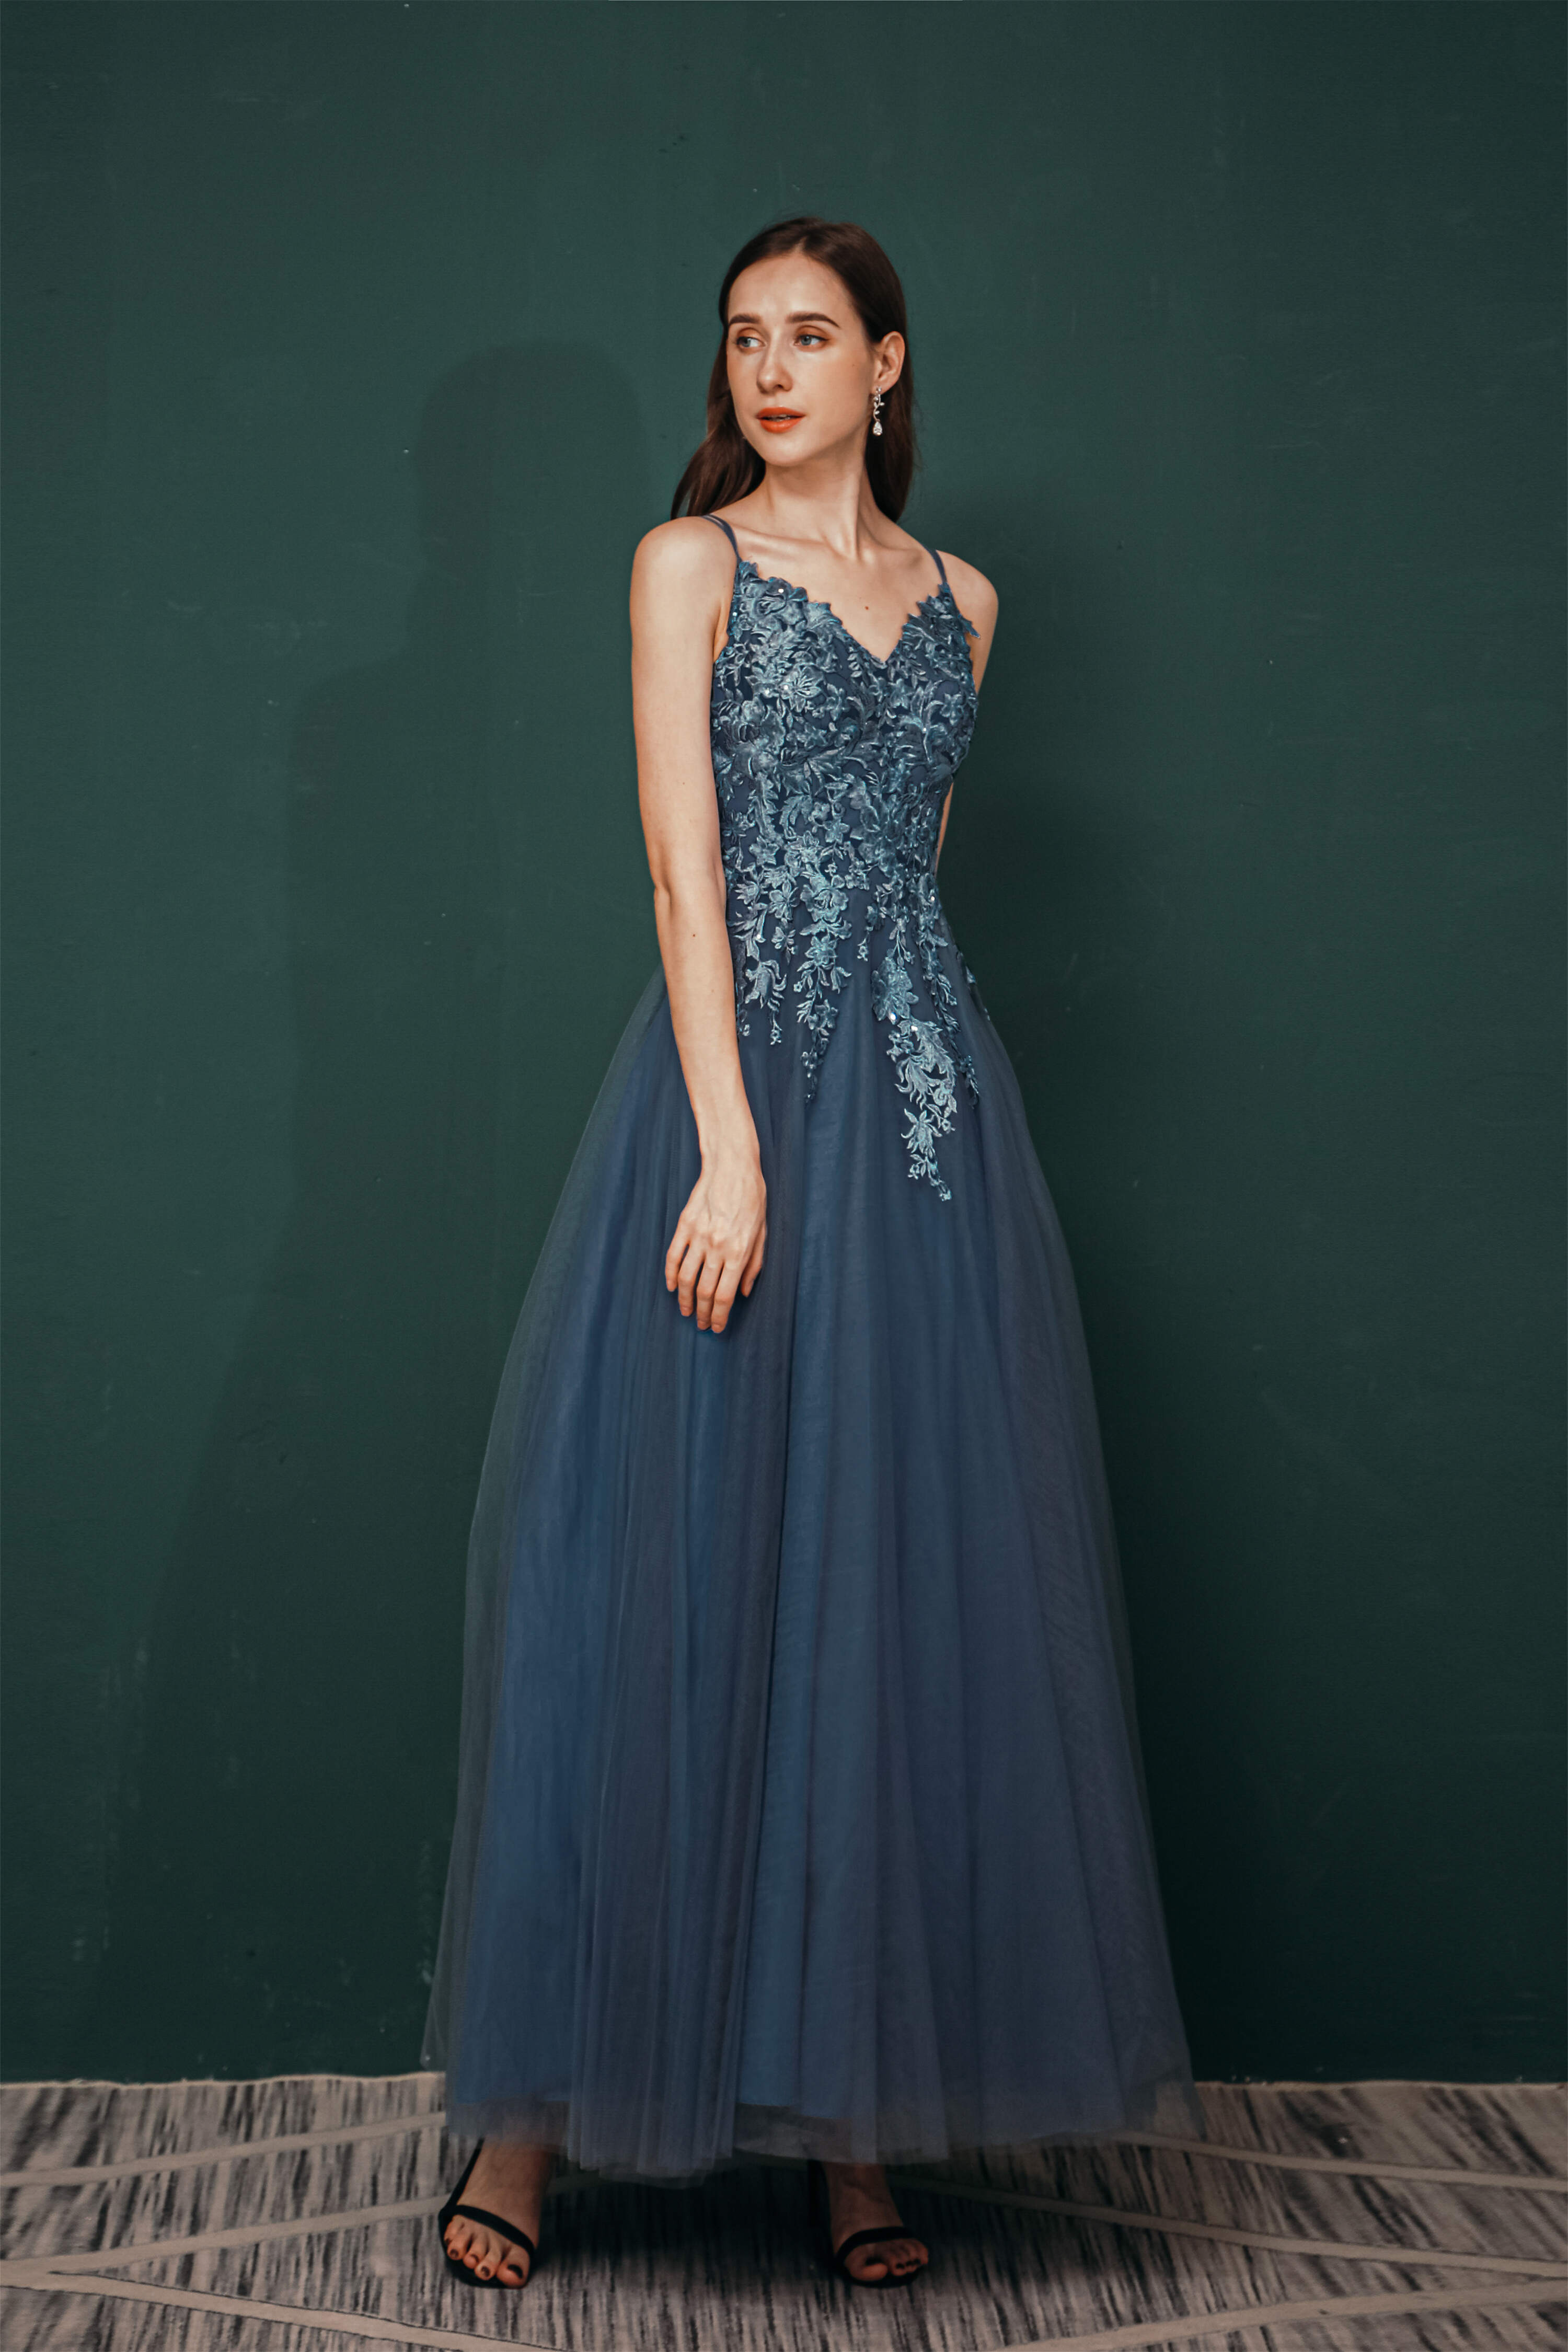 Party Dress Dress Code, Dusty Blue Tulle A-line Low back Spaghetti strap Prom Dresses